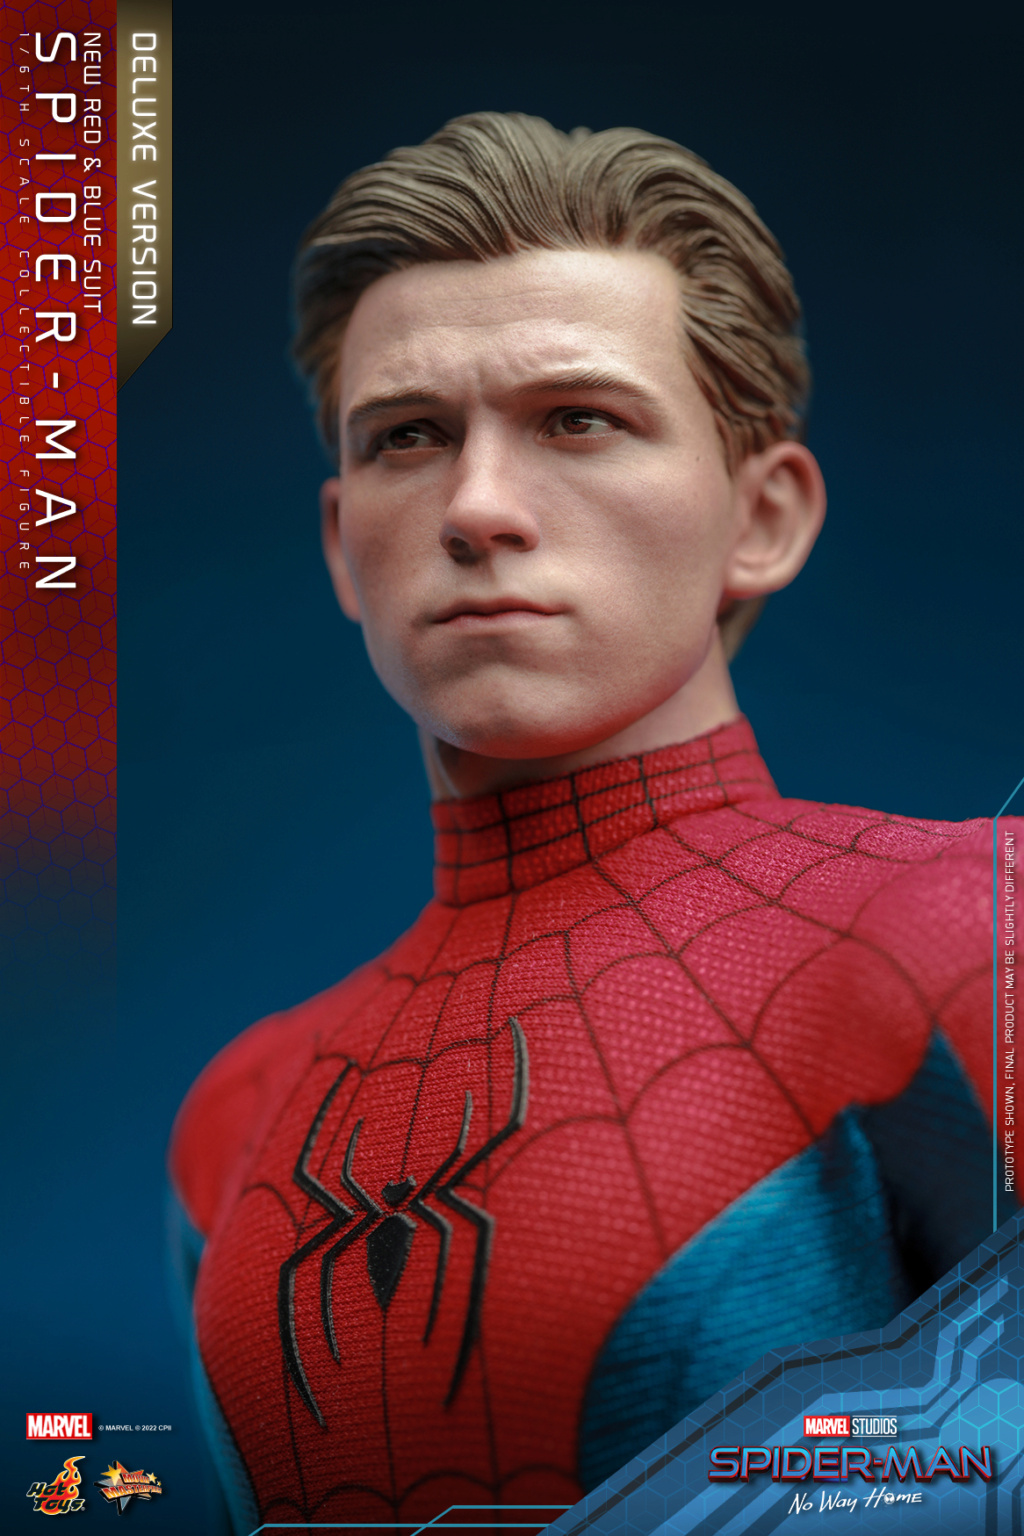 Marvel - NEW PRODUCT: HOT TOYS: SPIDER-MAN: NO WAY HOME SPIDER-MAN (NEW RED AND BLUE SUIT) 1/6TH SCALE COLLECTIBLE FIGURE (standard & deluxe) 42165910